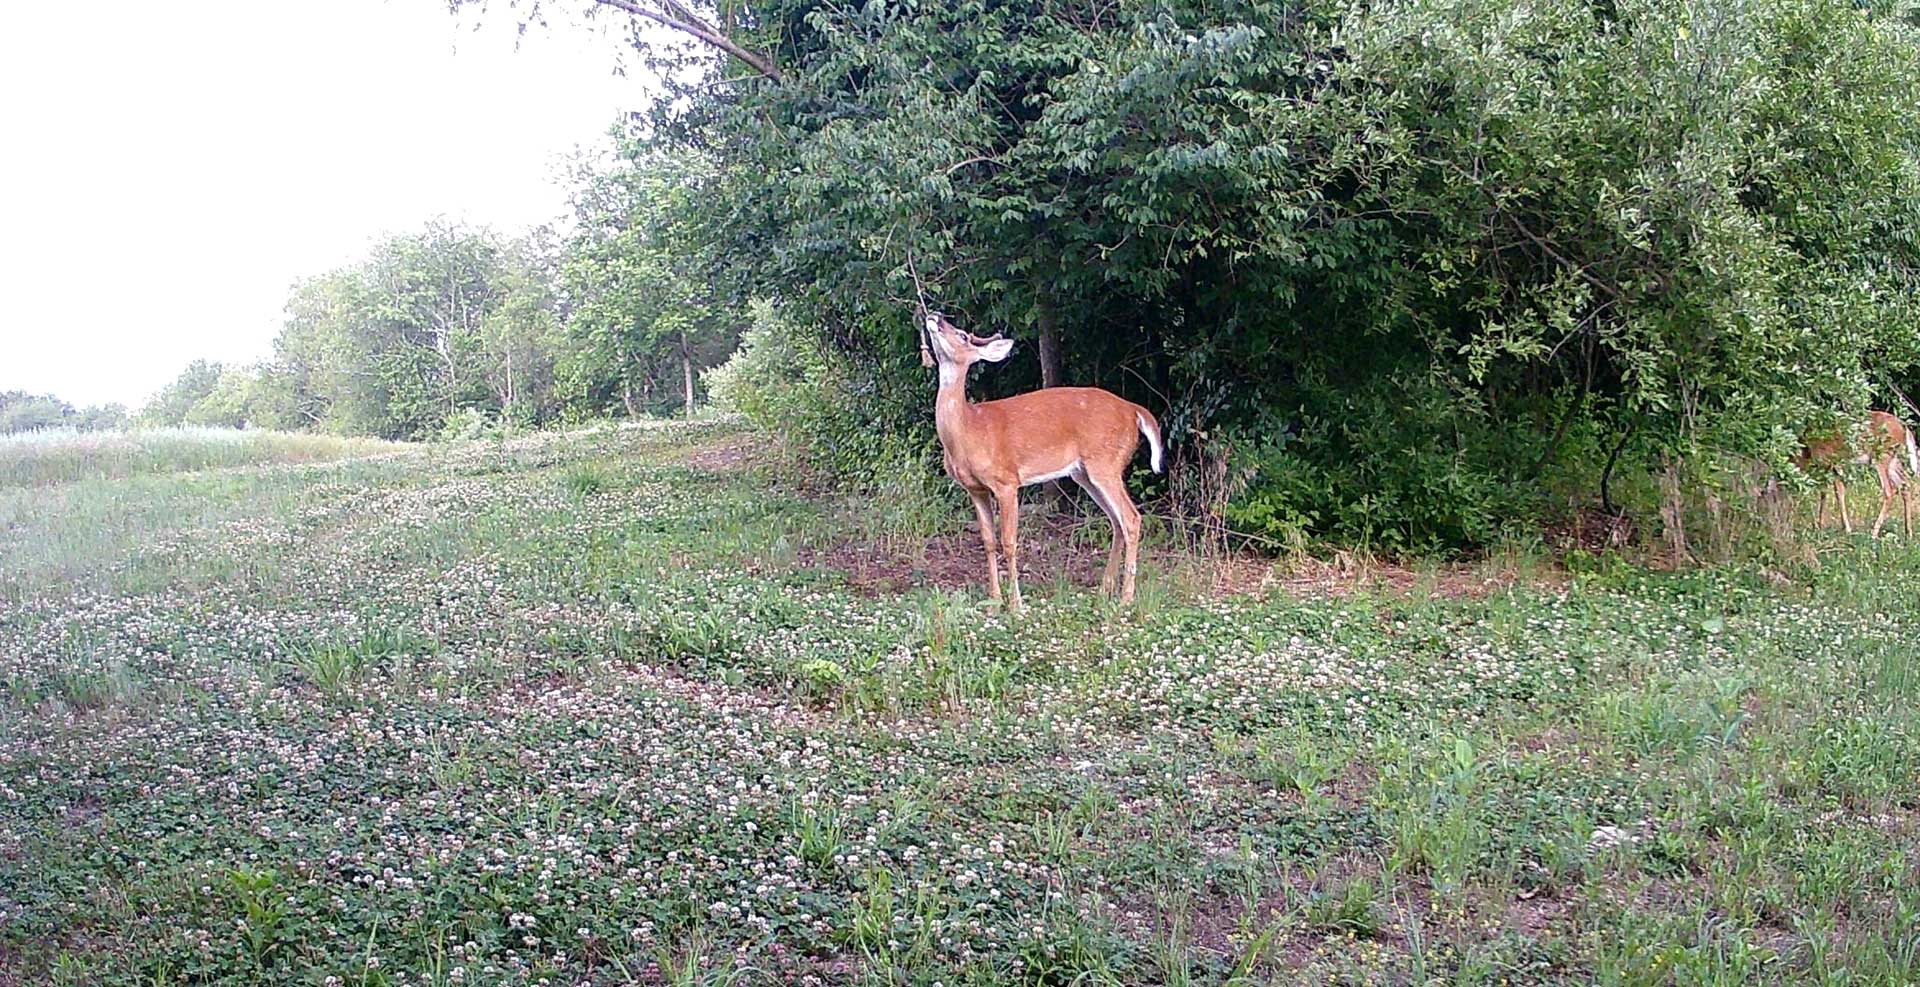 A deer standing in the grass near trees.